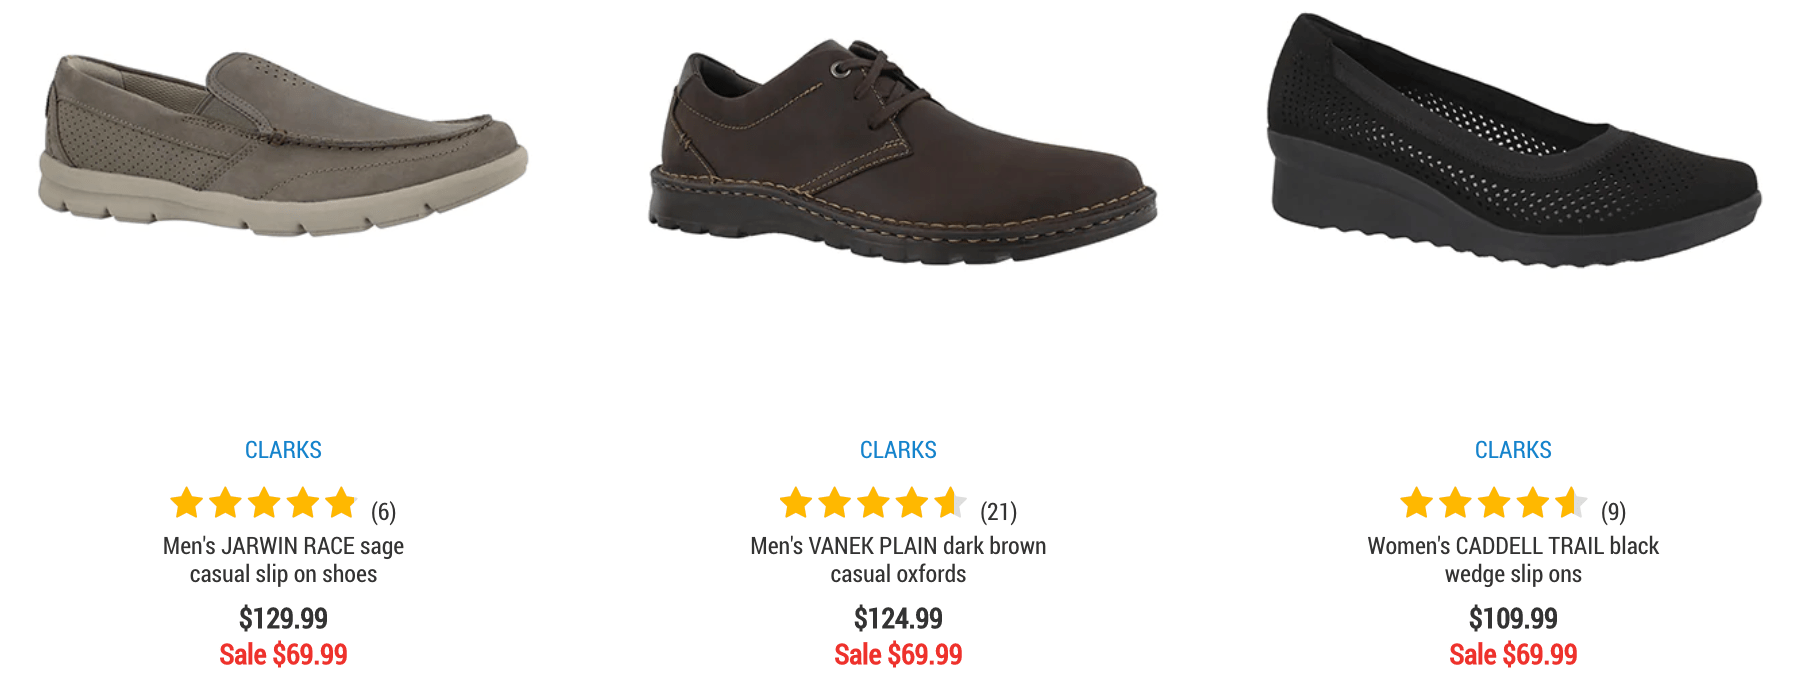 softmoc clarks off 66% - online-sms.in